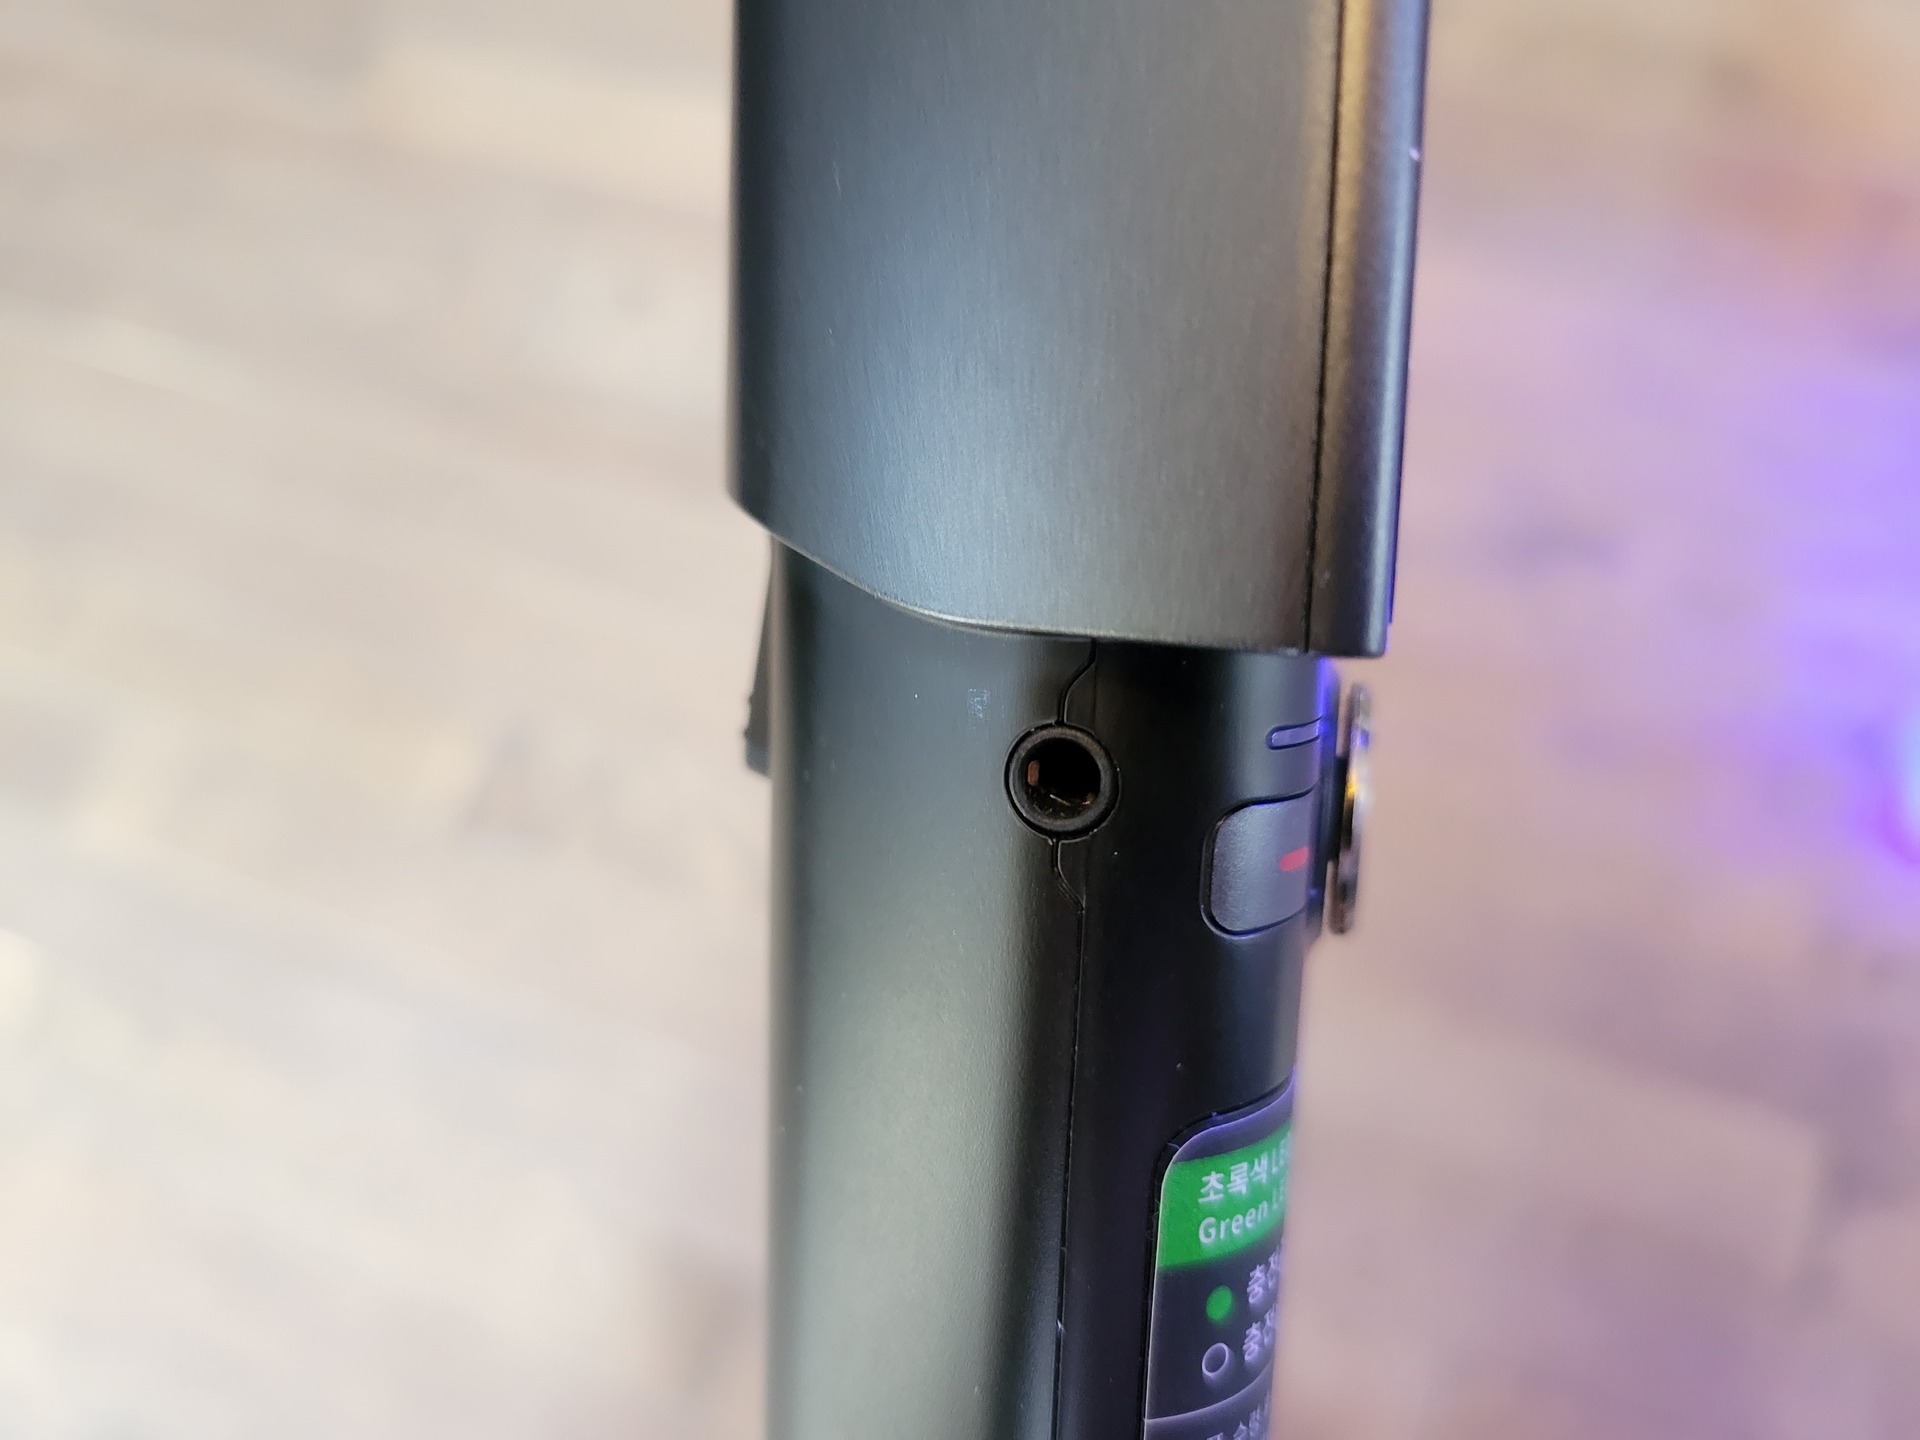 3.5mm audio jack on the side of the Snap-G